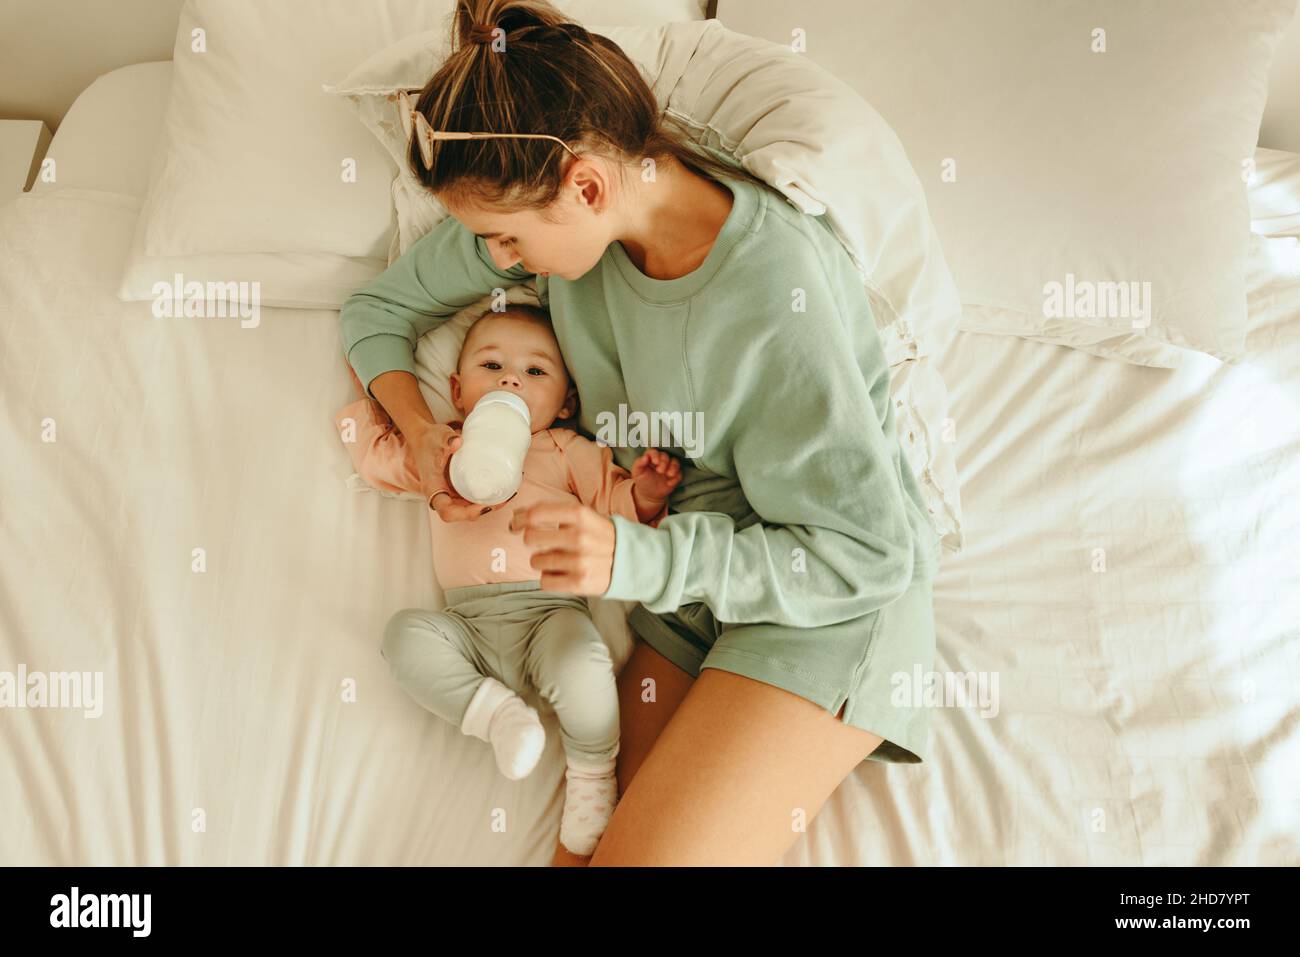 Overhead view of a loving mother feeding her newborn baby. High angle view of a new mom giving her baby formula milk while lying on the bed. Single mo Stock Photo